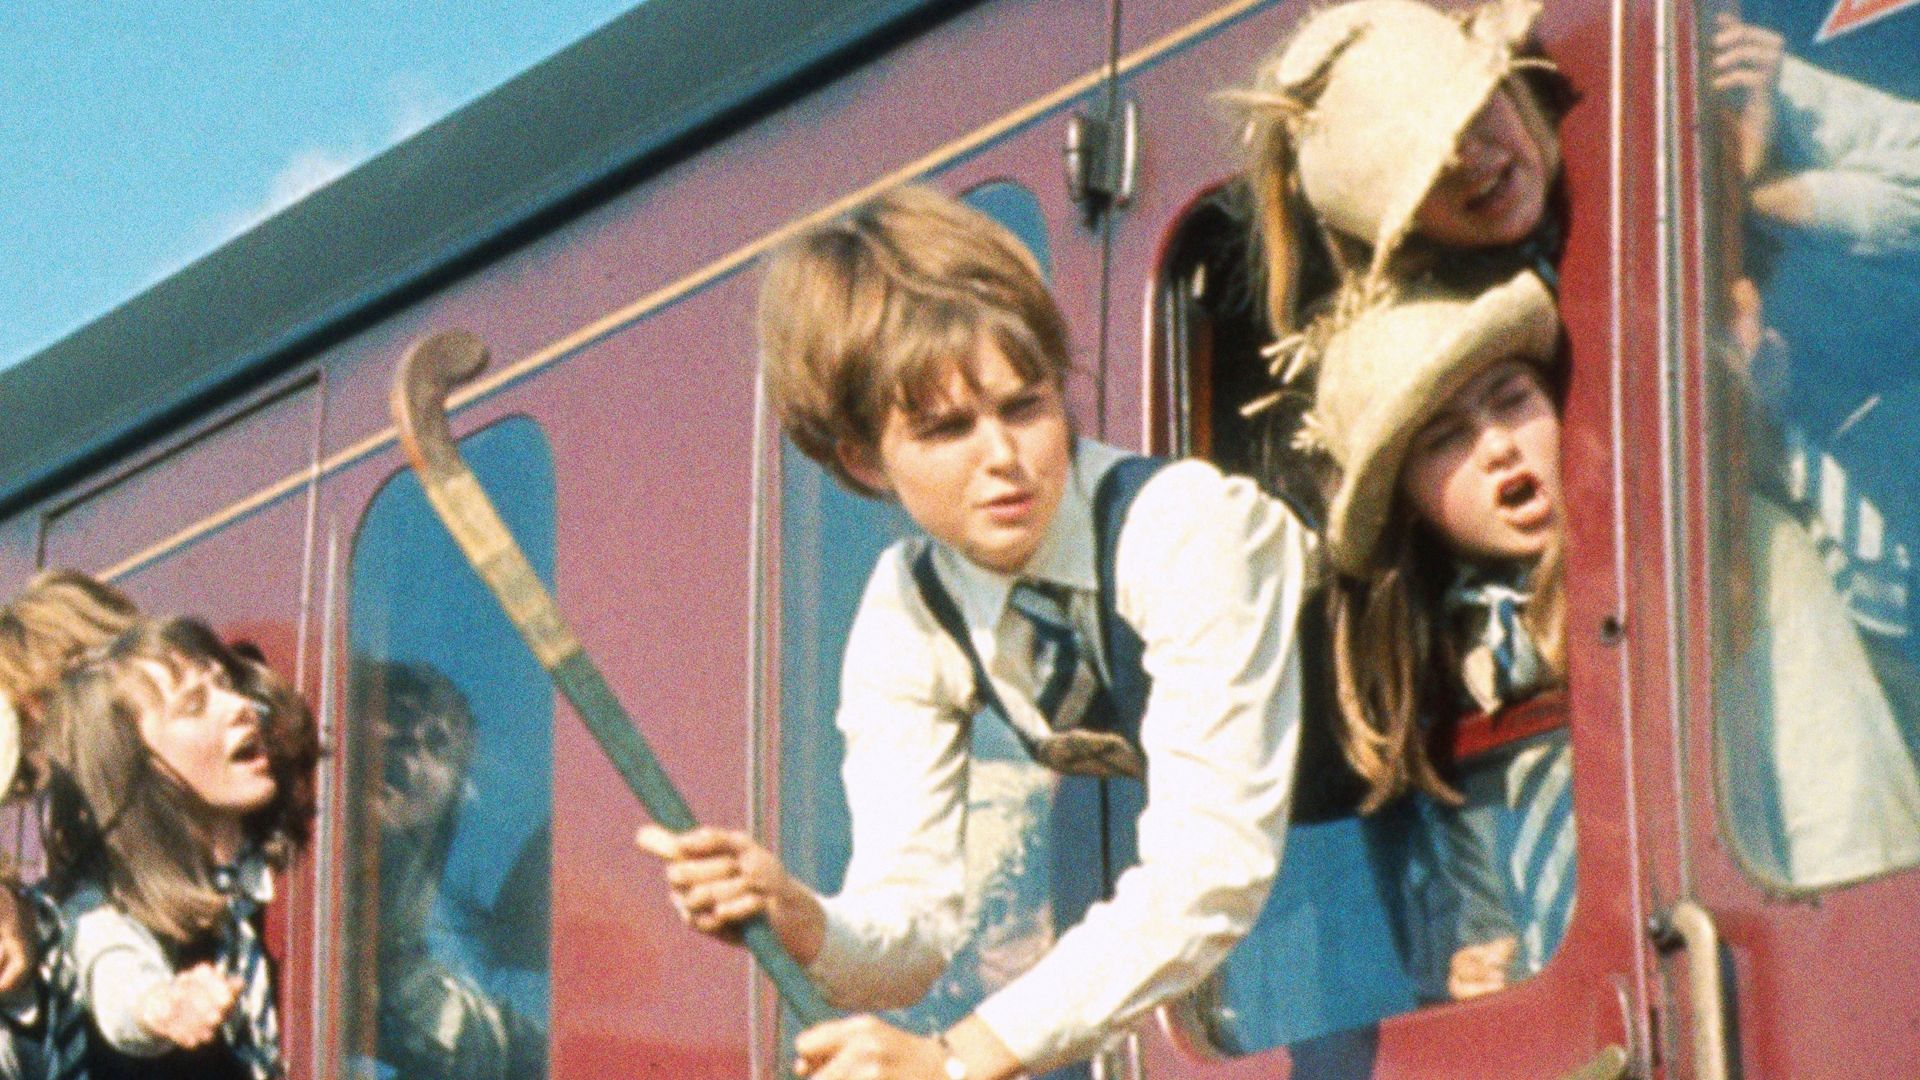 The Great St. Trinian's Train Robbery background